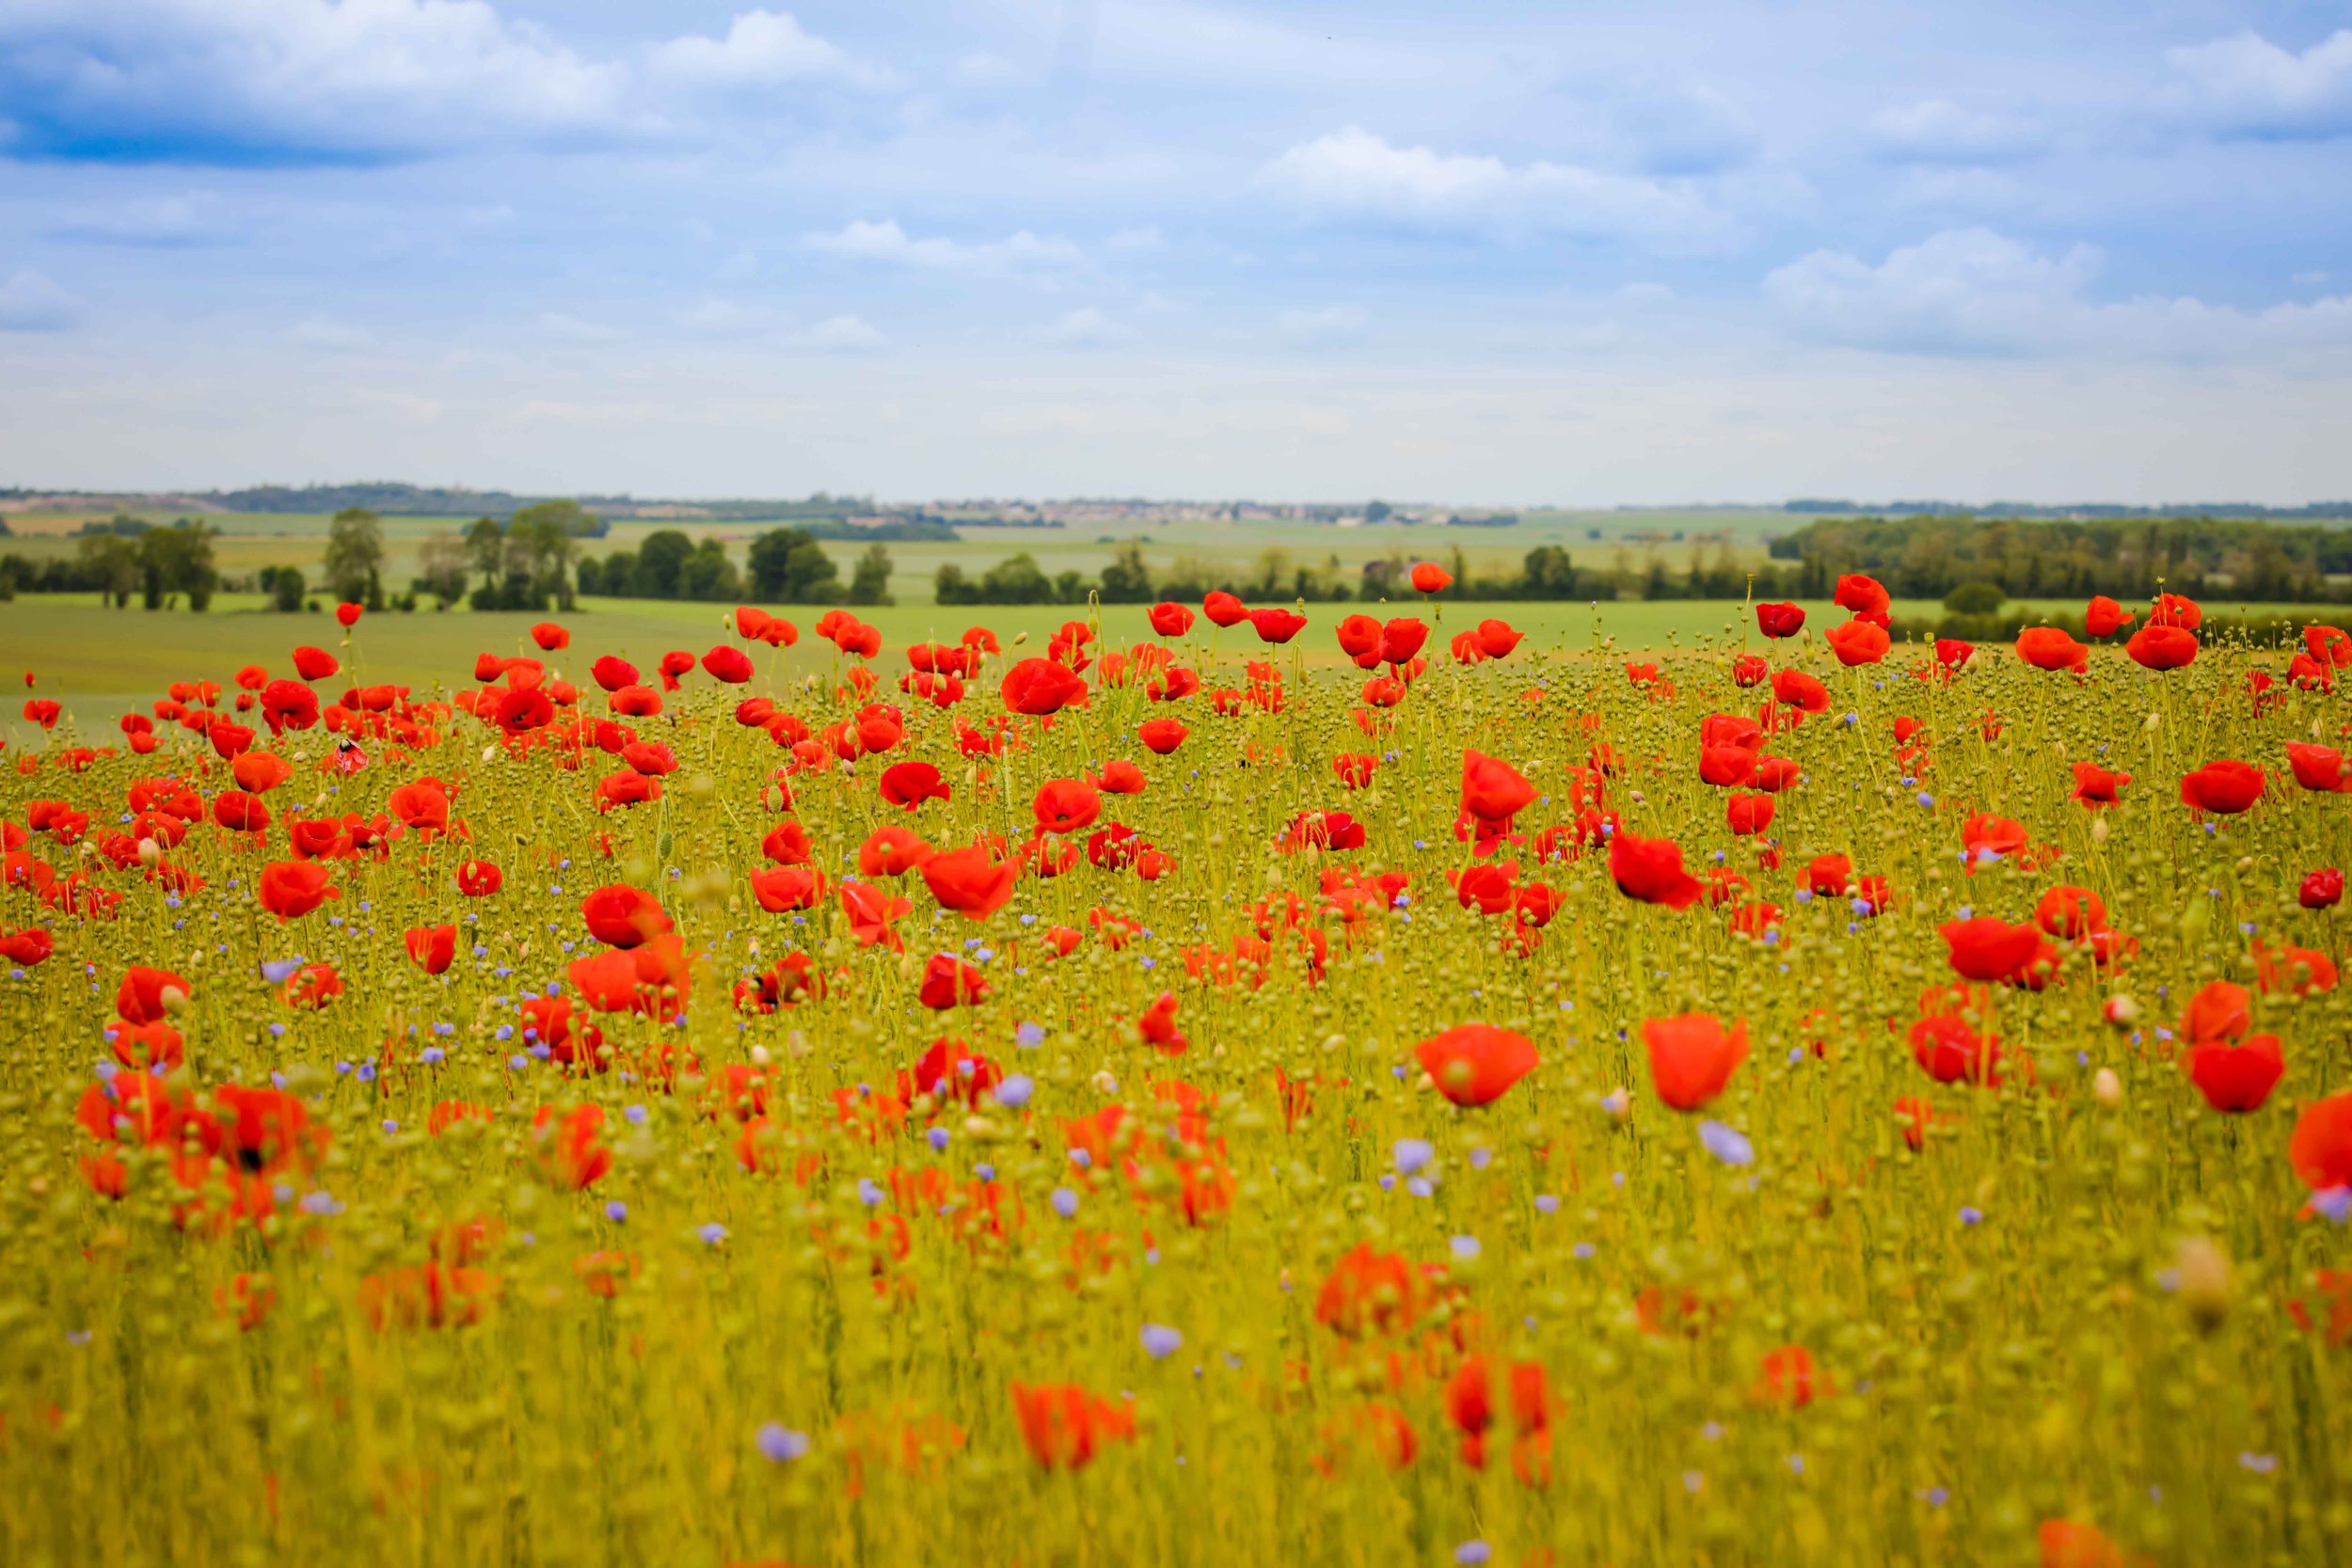 A field of red poppies; pretty scenery you might come across during a chateau break in France.